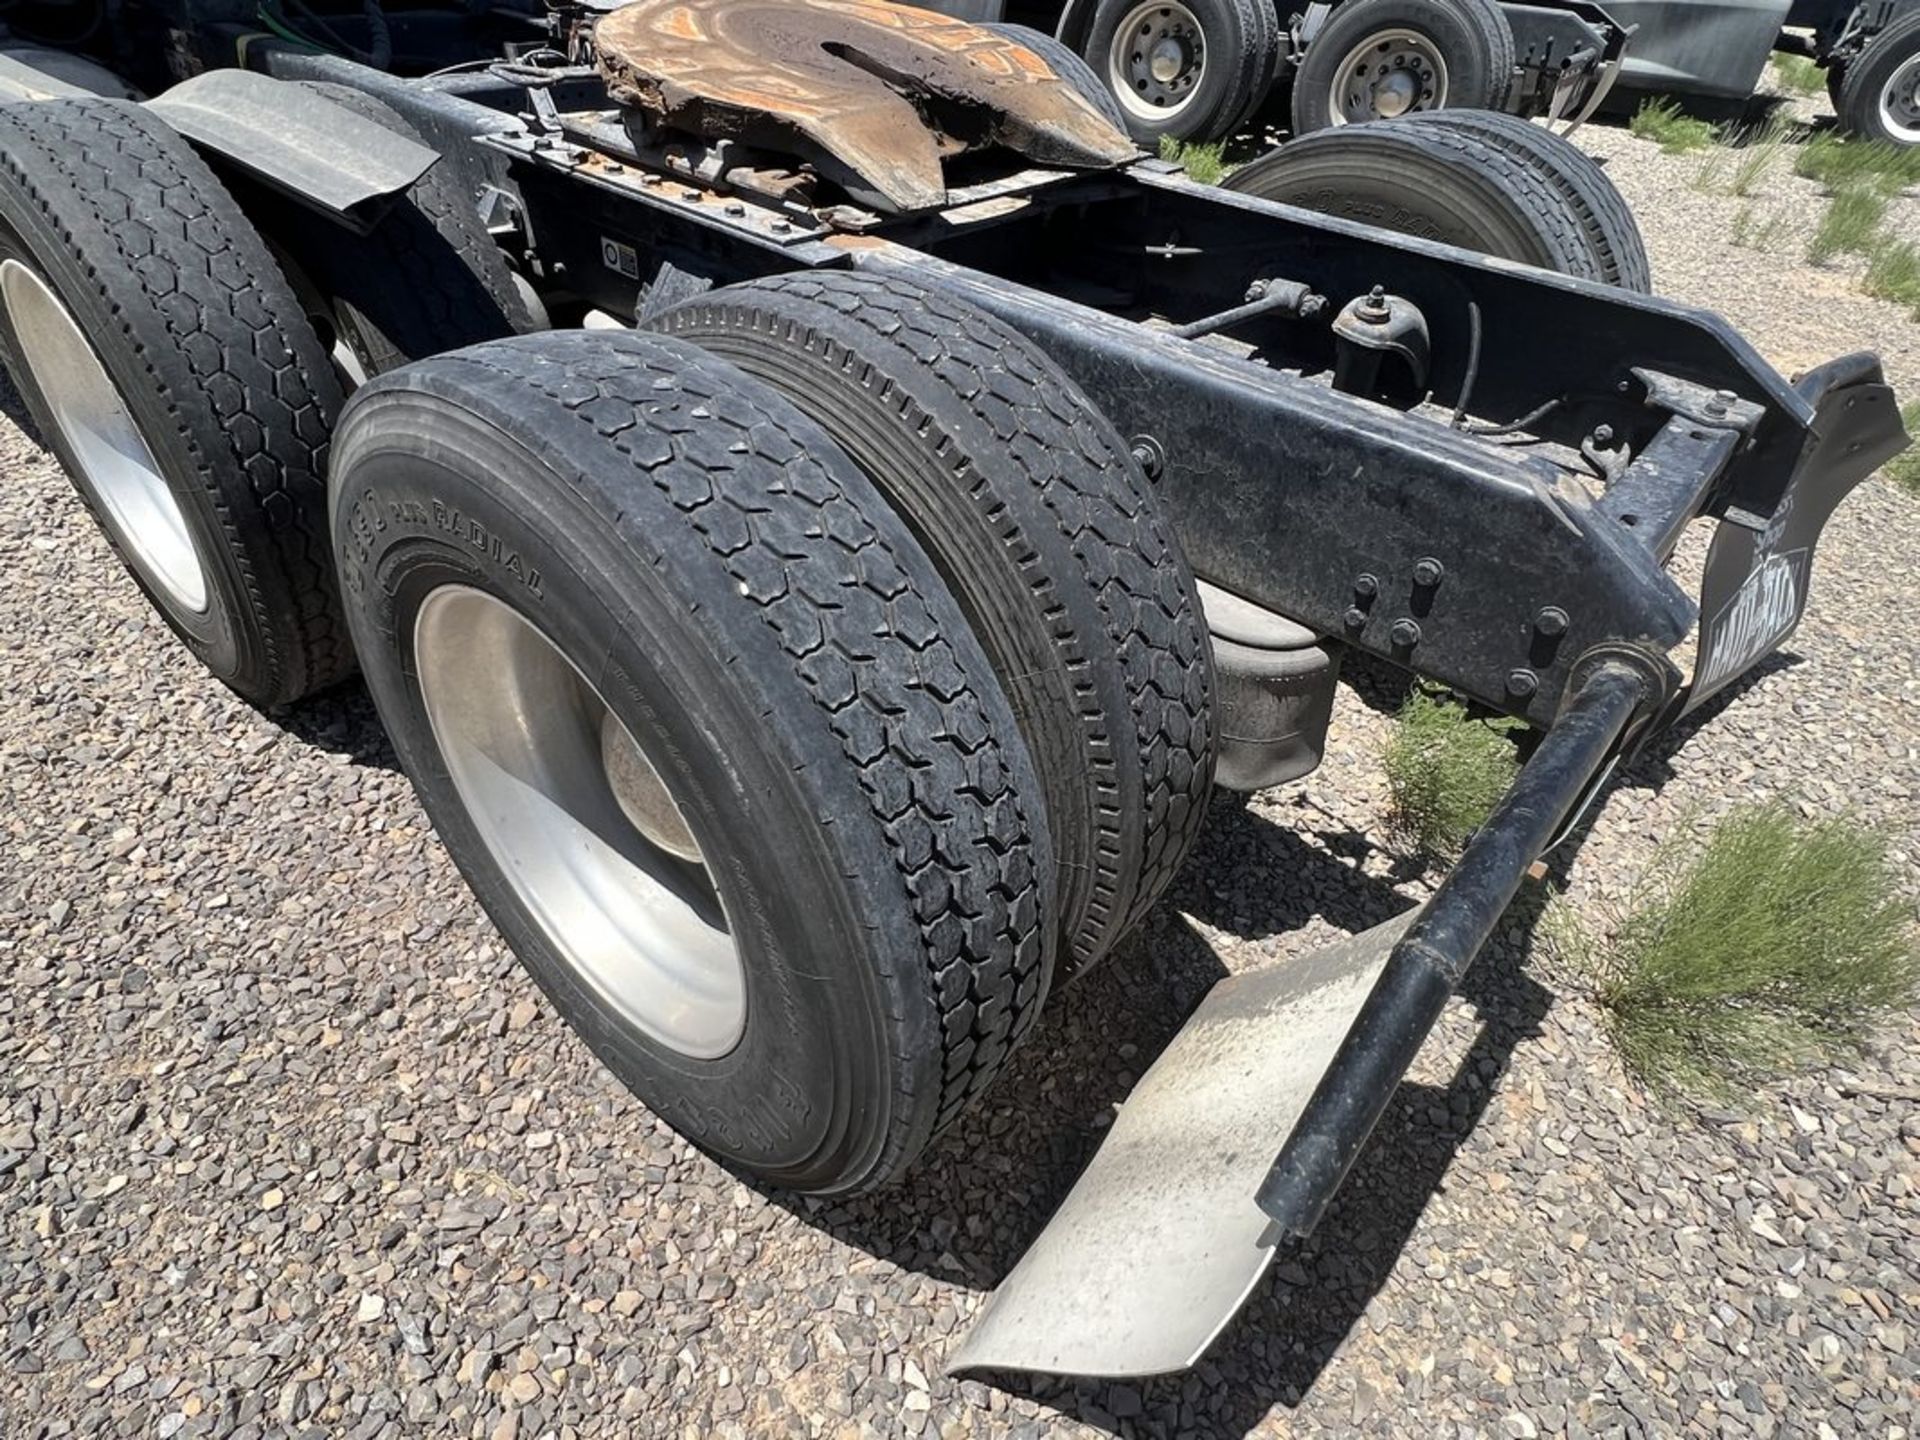 2016 Kenworth T-680 Tandem Axle Truck Tractor VIN 1XKYDP9X2GJ103025 - WRECKED - Image 12 of 16